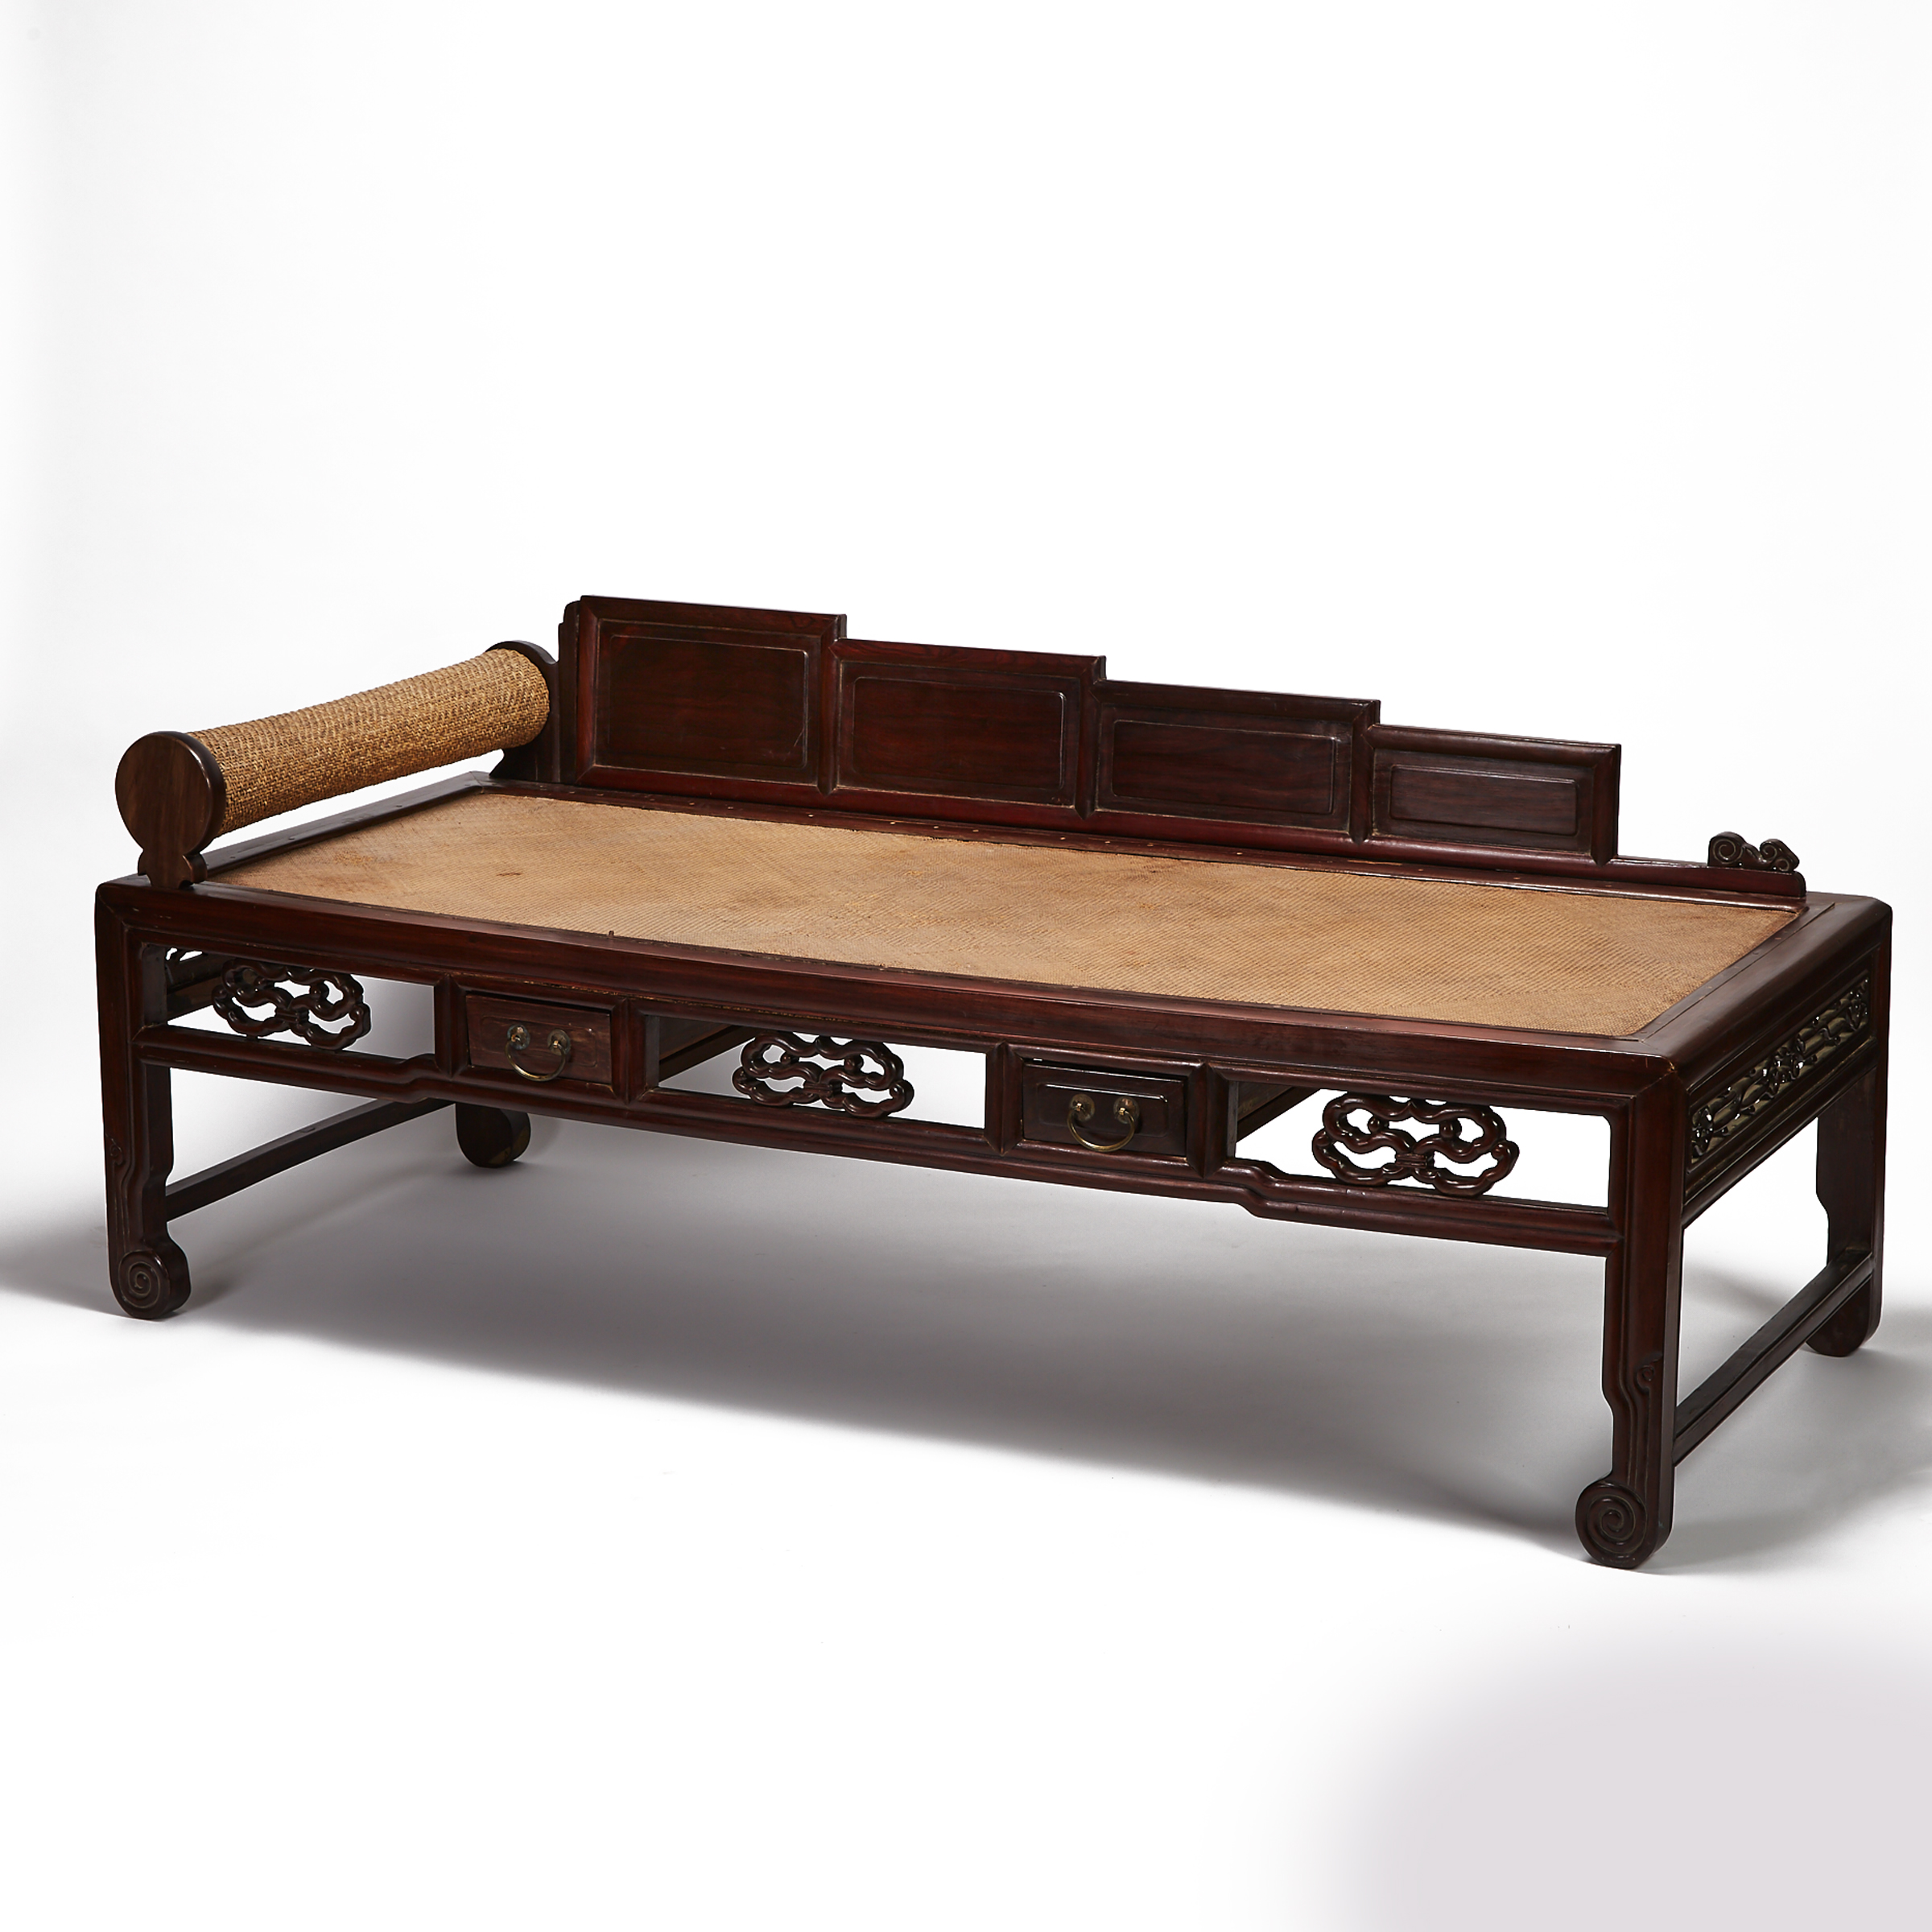 A Huali and Mixed Wood Daybed, Late Qing/Early Republic Period